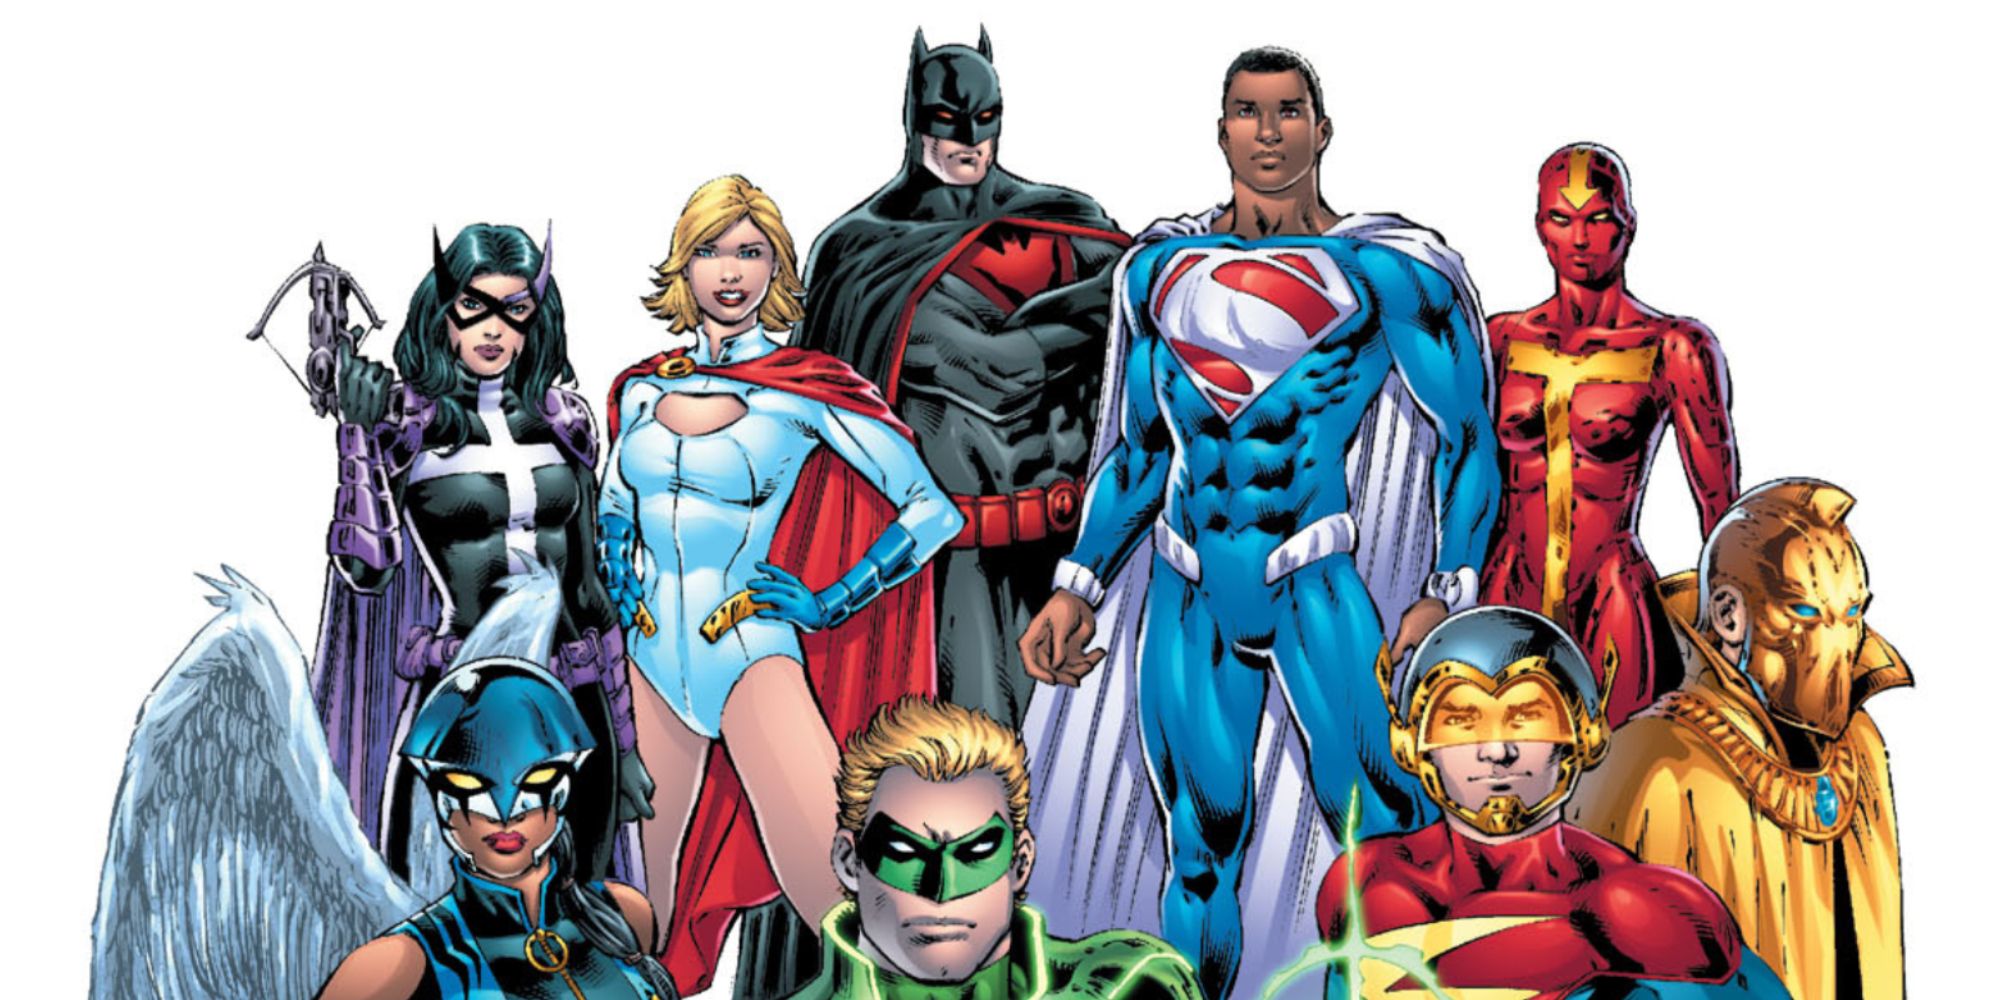 The Wonders of the World assemble in DC Comics.